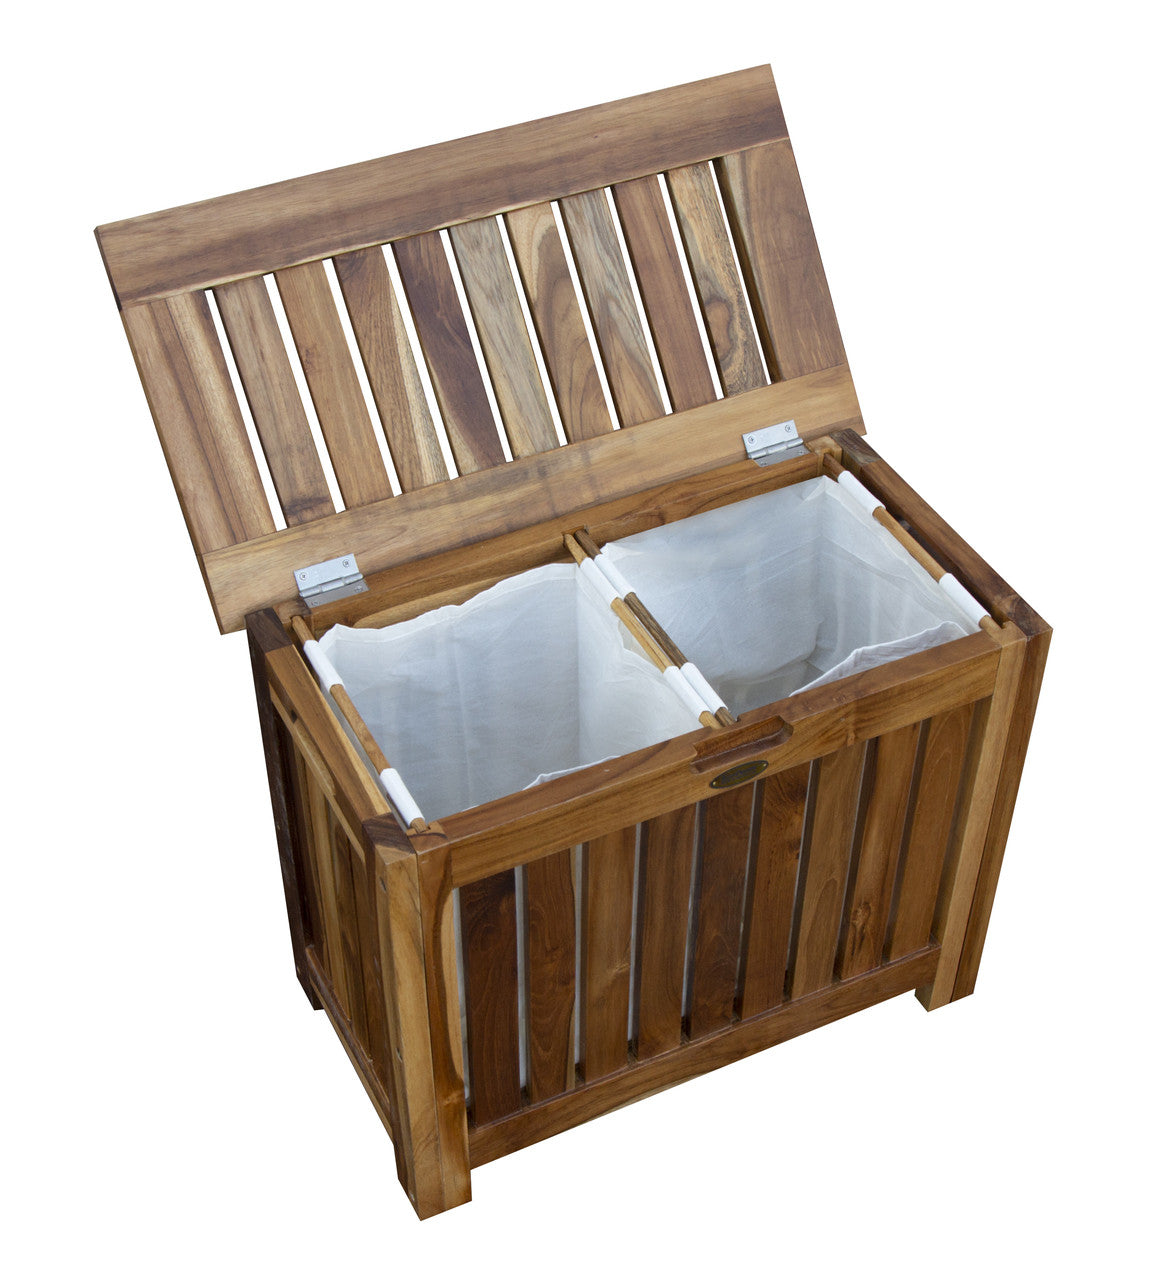 EcoDecors® Eleganto® 23" Wide Teak Wood Double Laundry Storage Hamper with Removable Bags in EarthyTeak® Finish